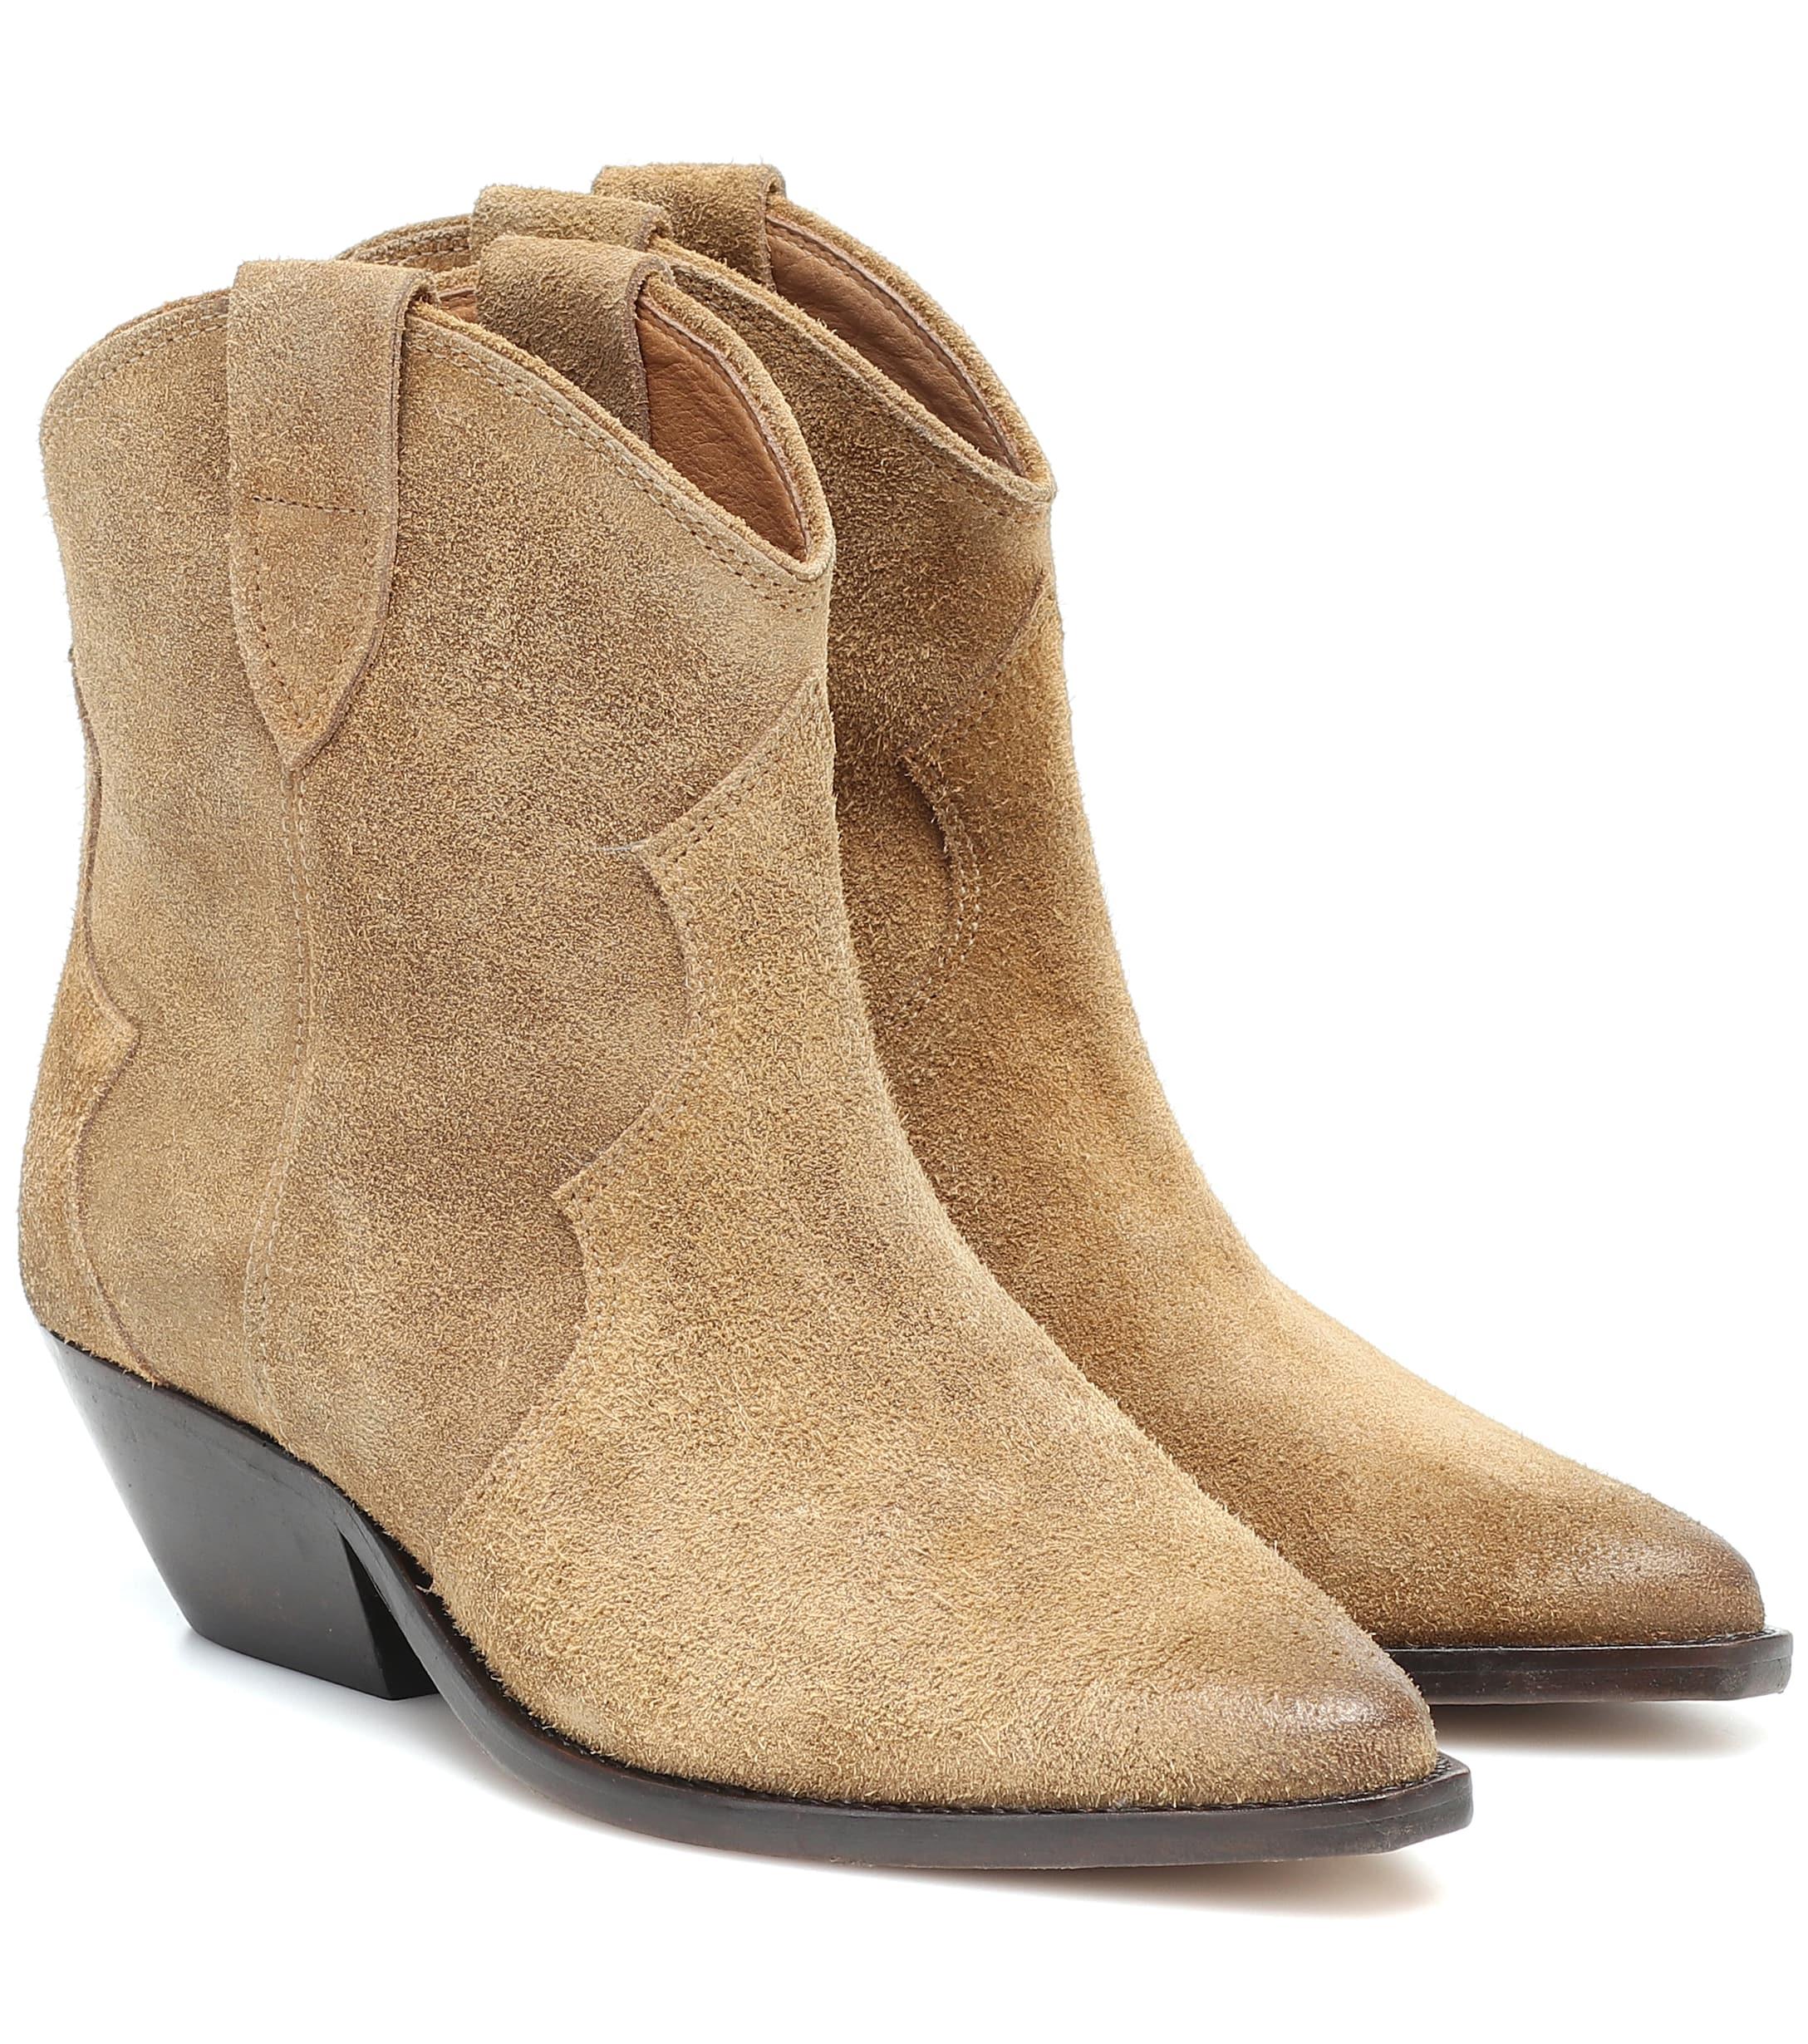 Isabel Marant Dewina Suede Ankle Boots in Brown - Lyst